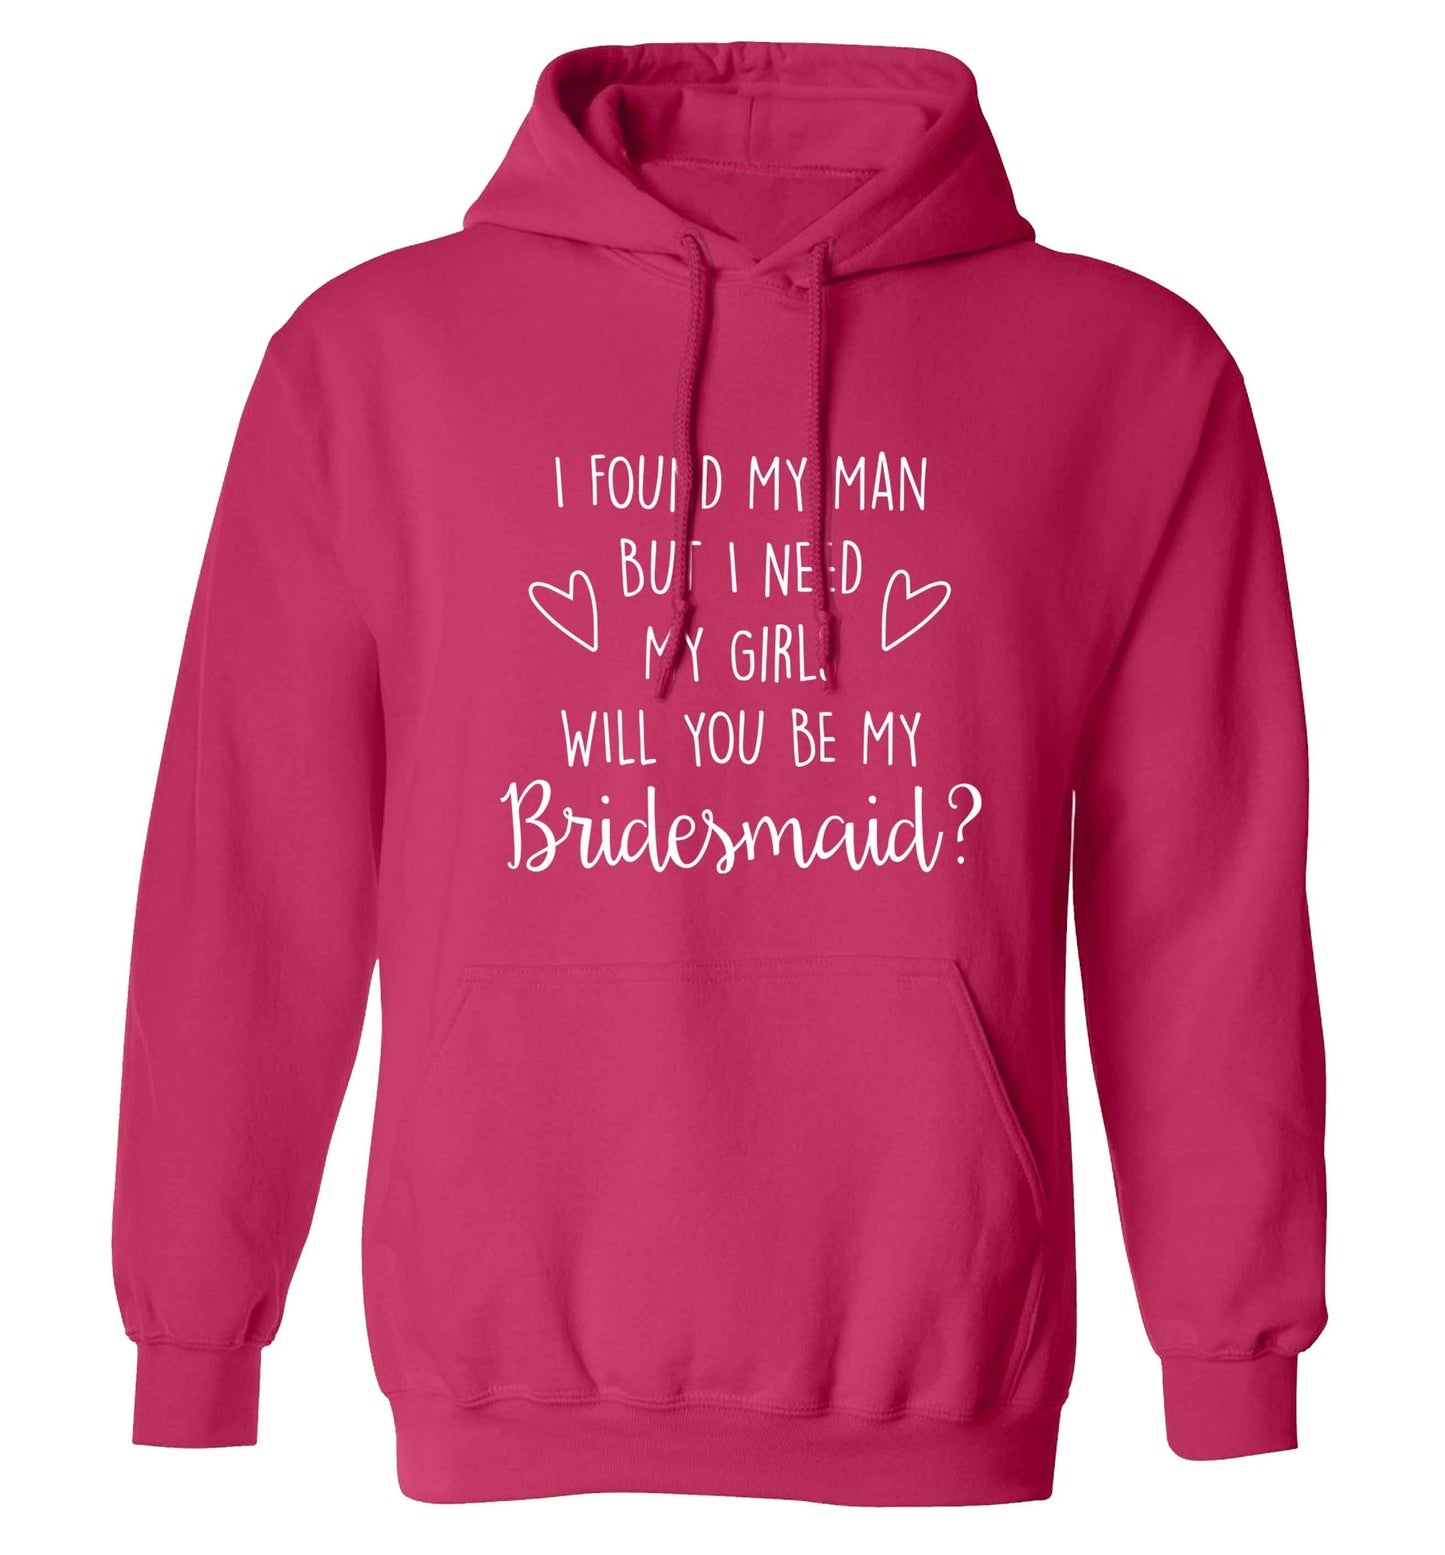 I found my man but I need my girls will you be my bridesmaid? adults unisex pink hoodie 2XL